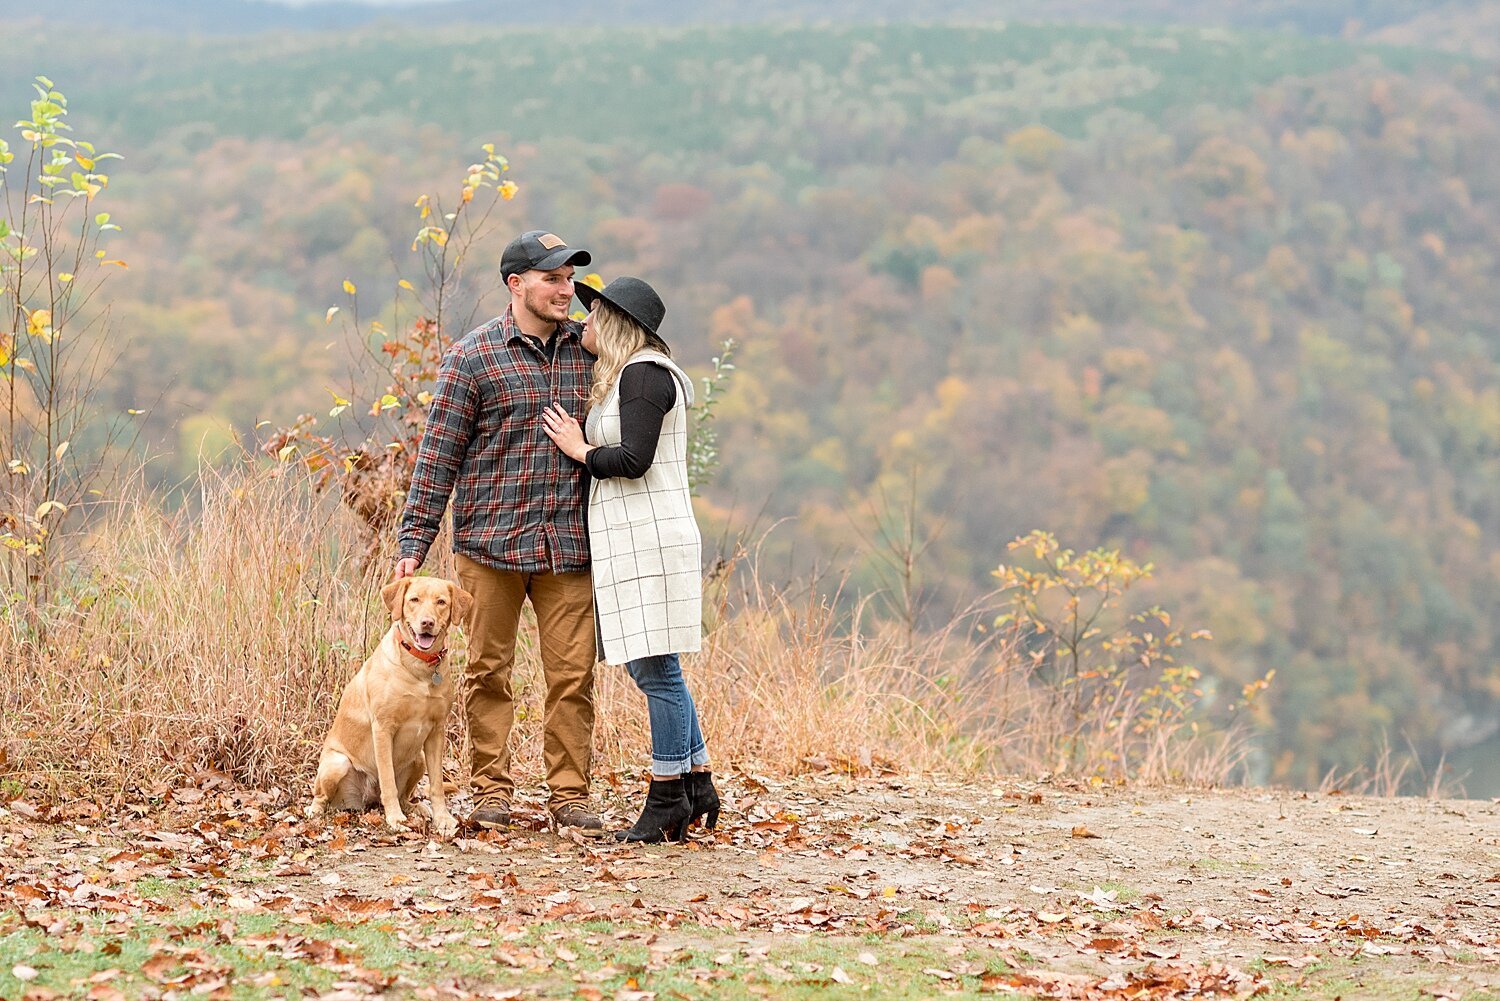 Pinnacle Overlook Holtwood PA Surprise Proposal Photography_8736.jpg